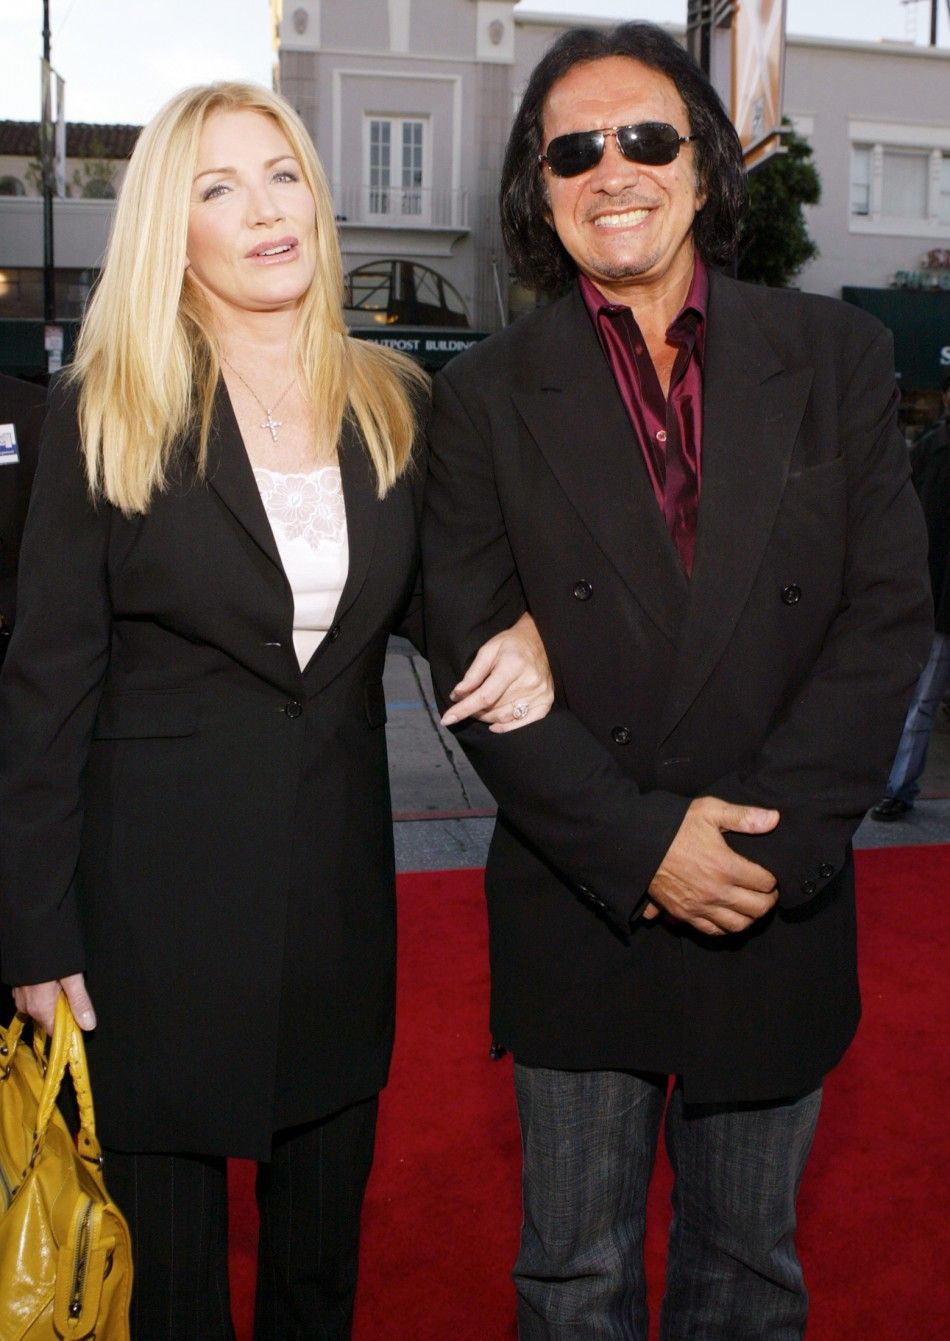 U.S. actress Shannon Tweed and husband U.S. rock musician Gene Simmons arrive for the premiere of quotRizequot at the Egyptian Theatre in Hollywood June 21, 2005